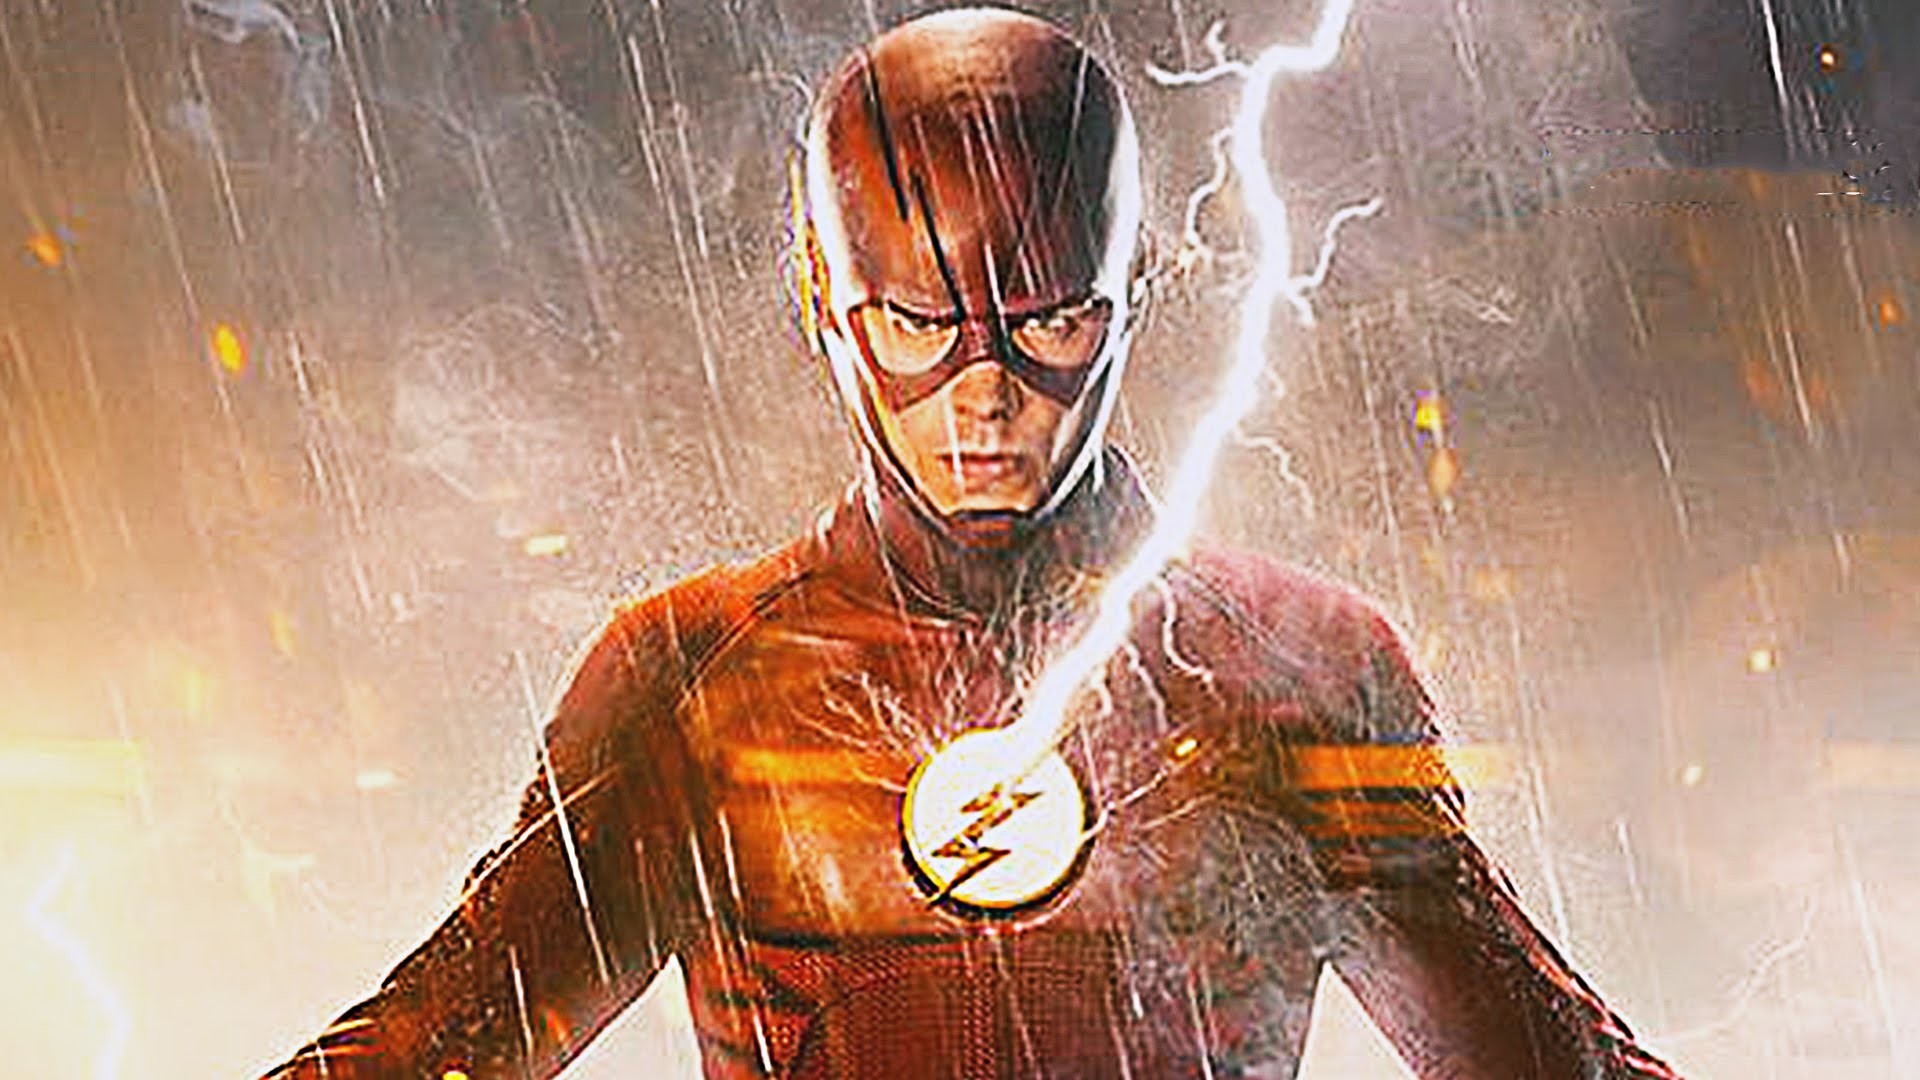 The Flash CW Wallpaper HD (79+ images)